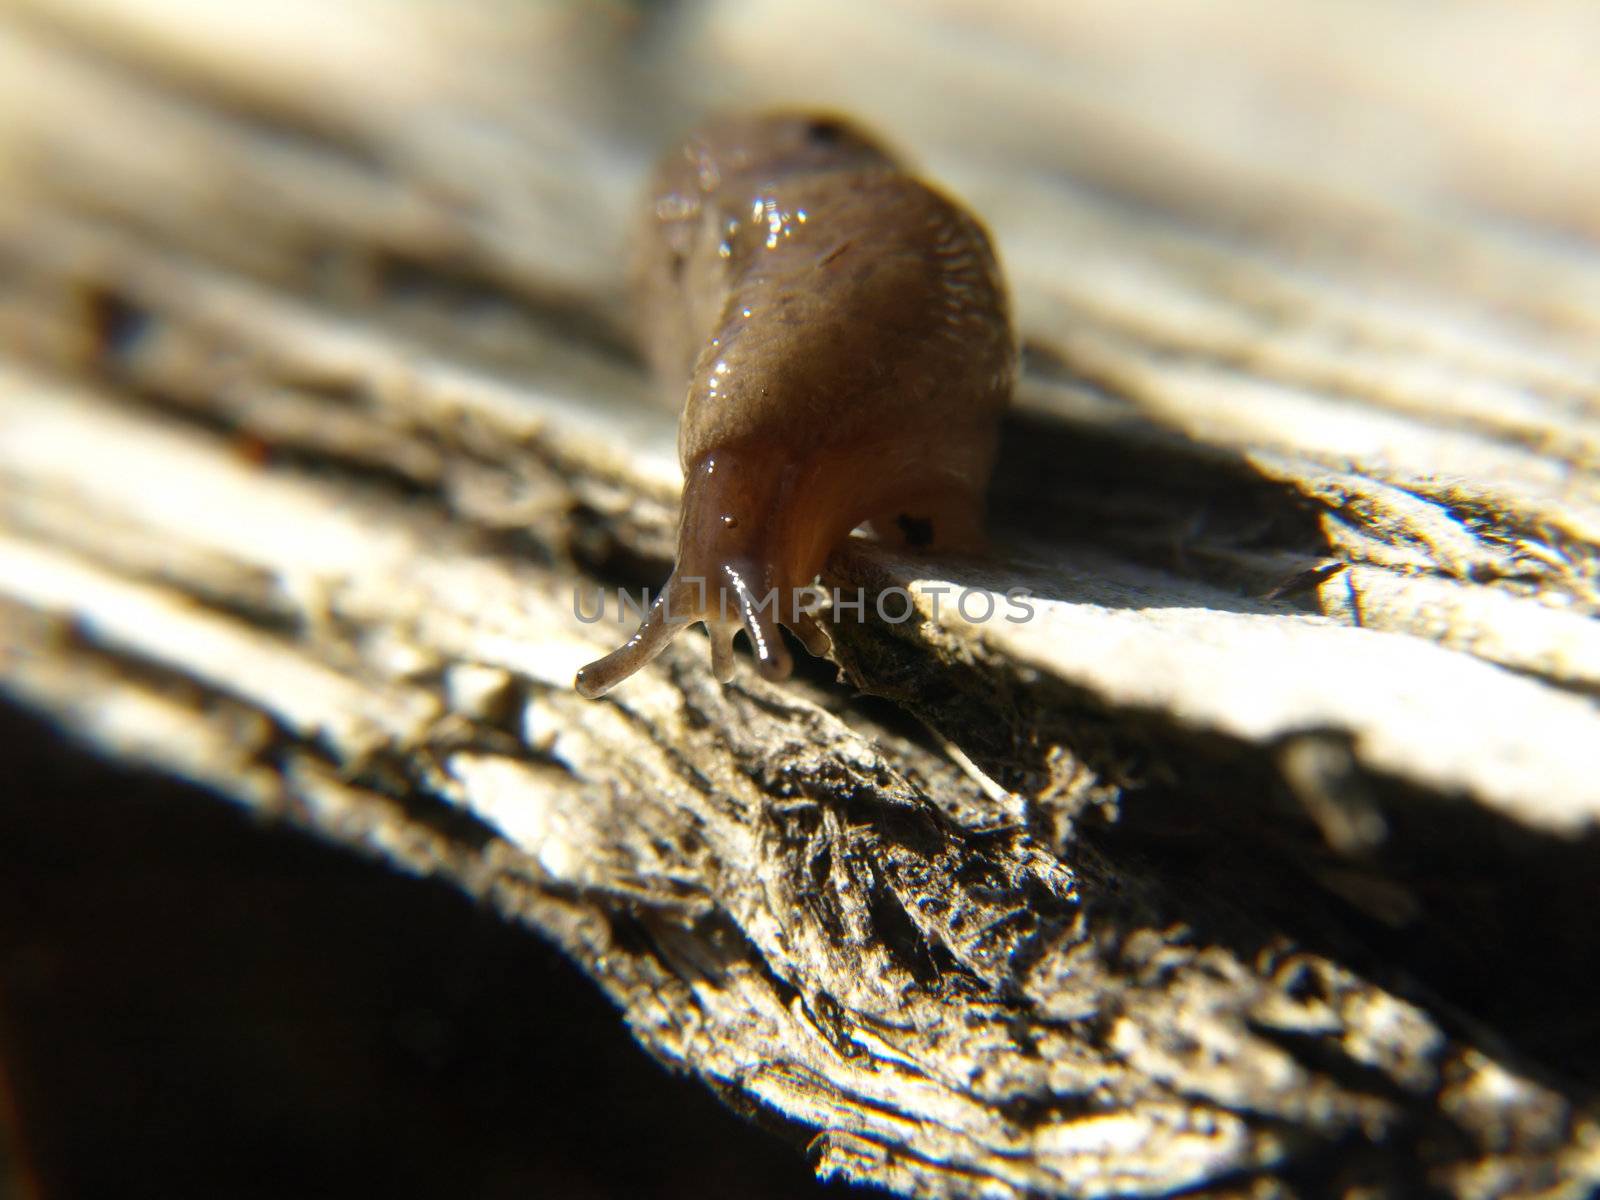 A slug traveling on a piece of wood comes to the edge and looks down